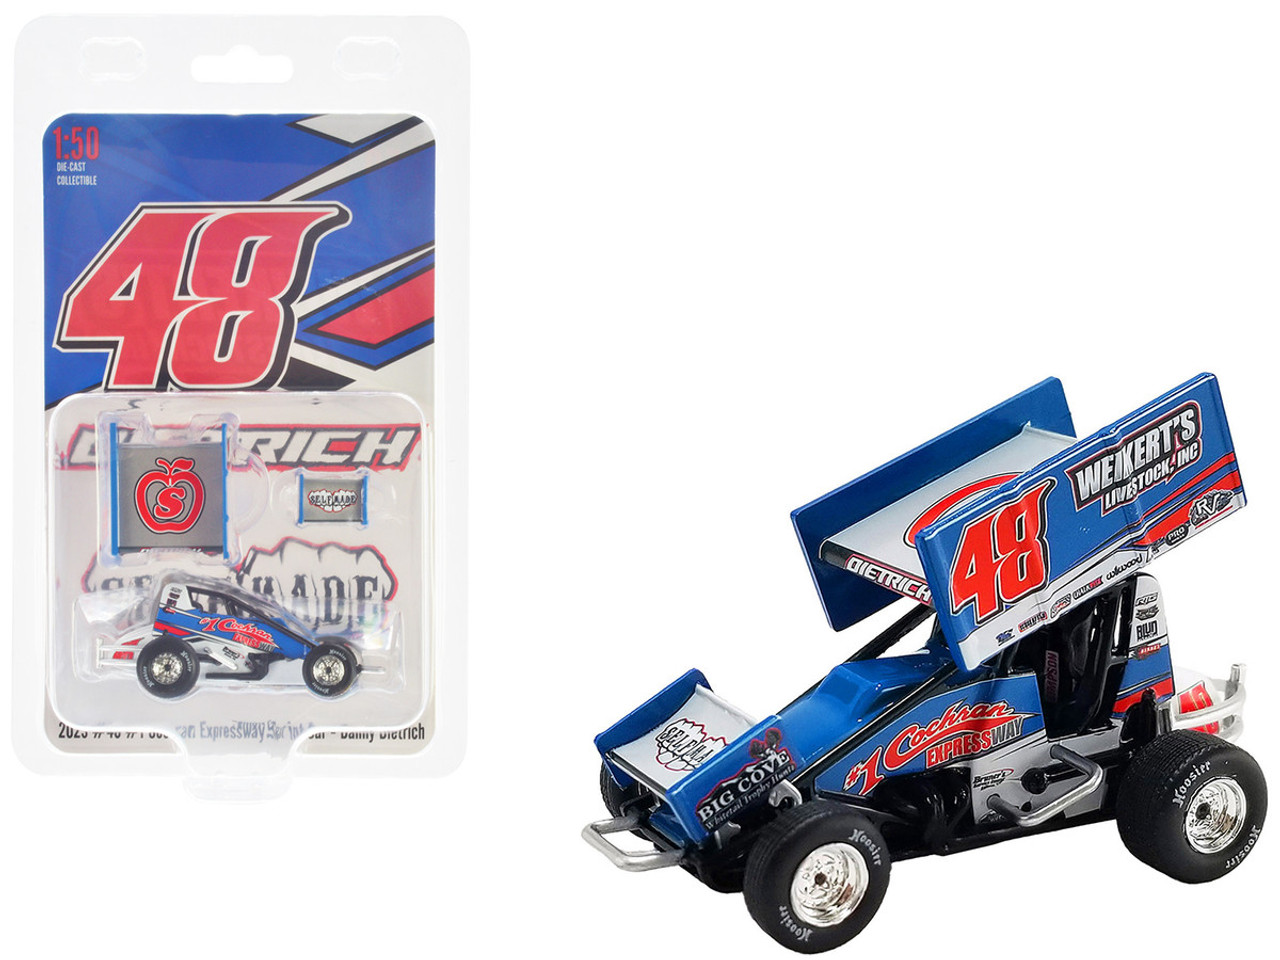 Winged Sprint Car #48 Danny Dietrich "Cochran Expressway - Weikert's Livestock Inc" Gary Kauffman Racing "World of Outlaws" (2023) 1/50 Diecast Model Car by ACME